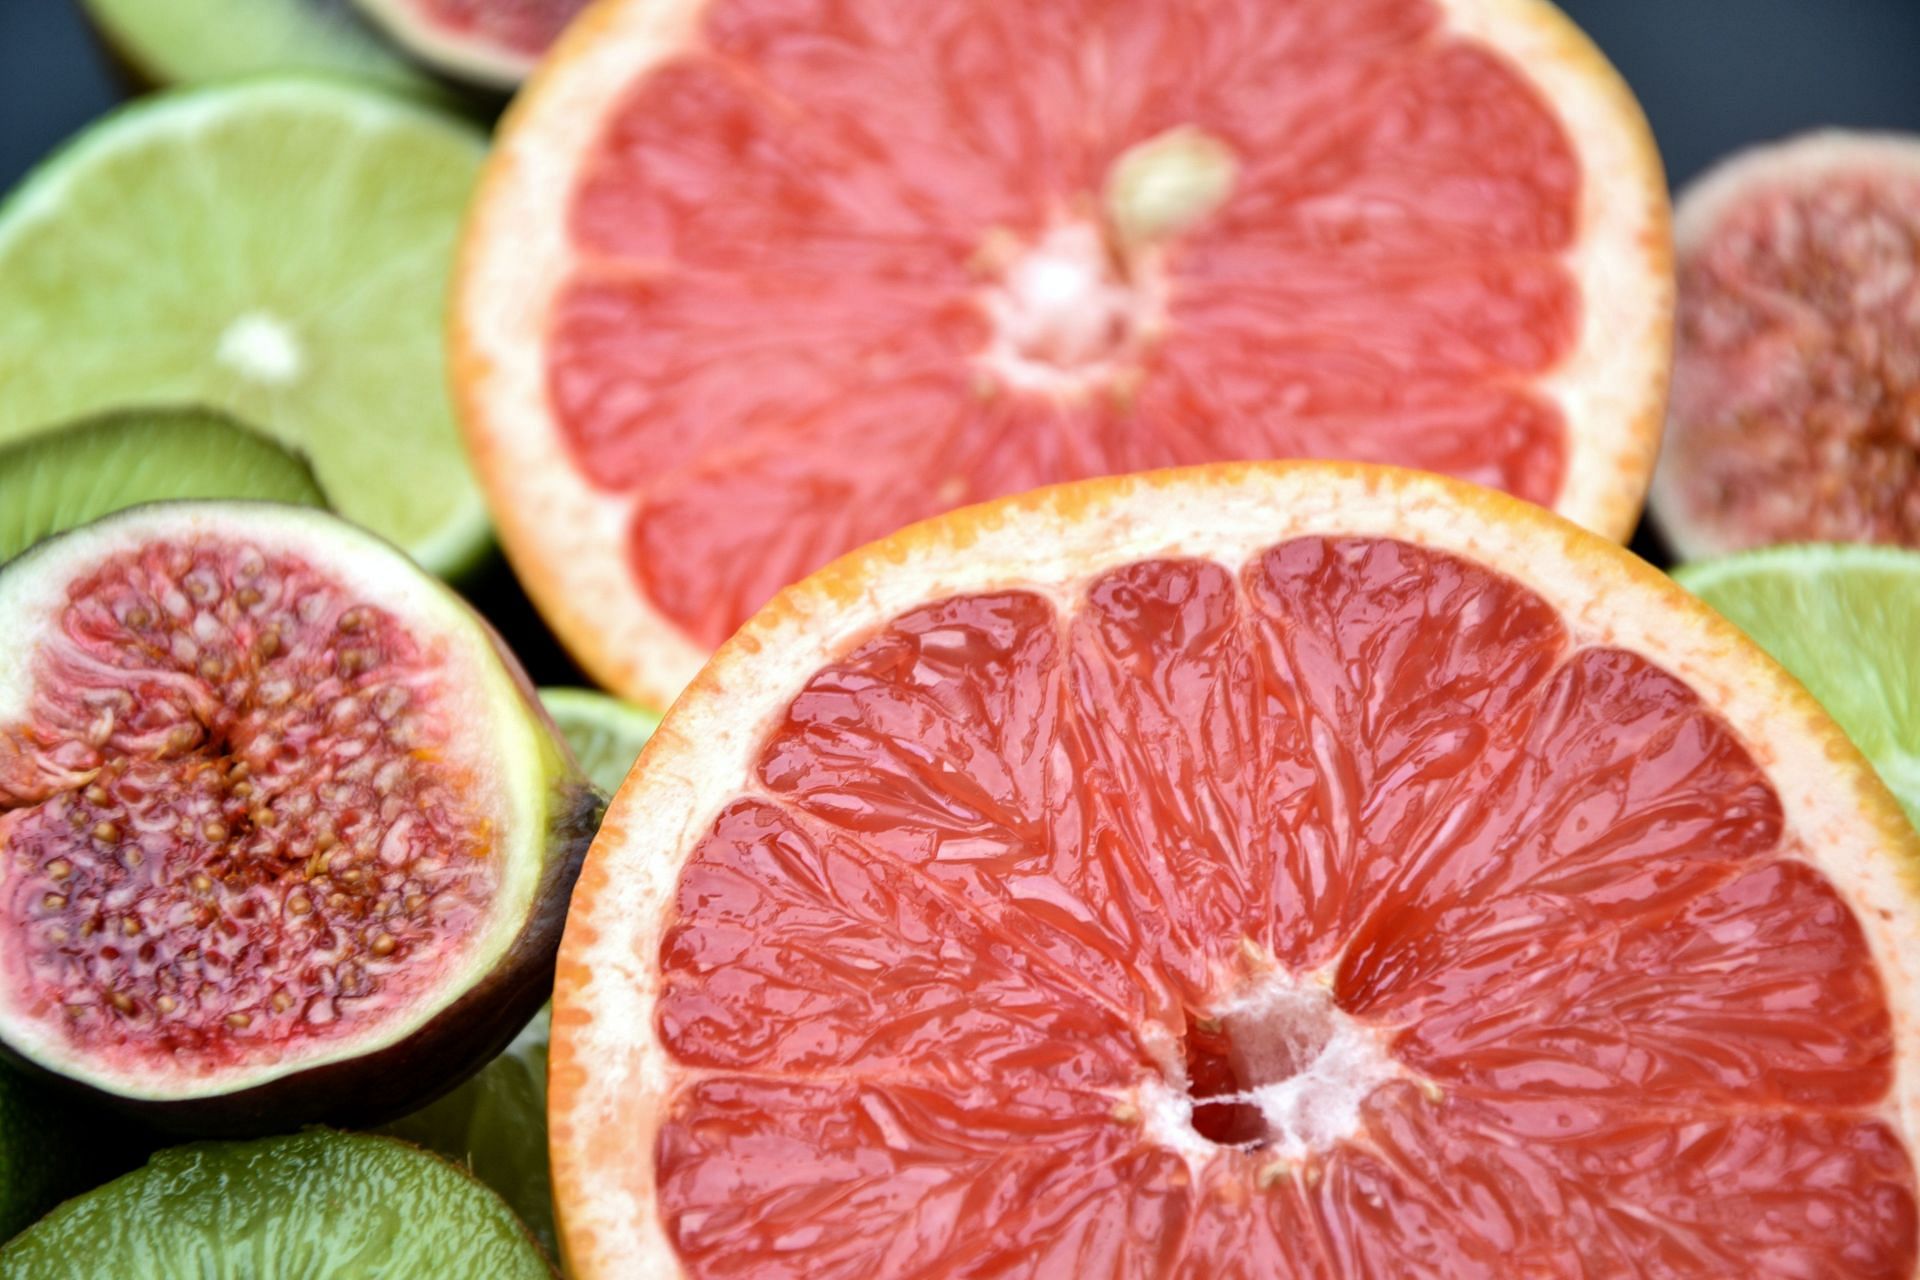 The flesh of grapefruit is pink, red, or white and juicy (Image via Pexels)